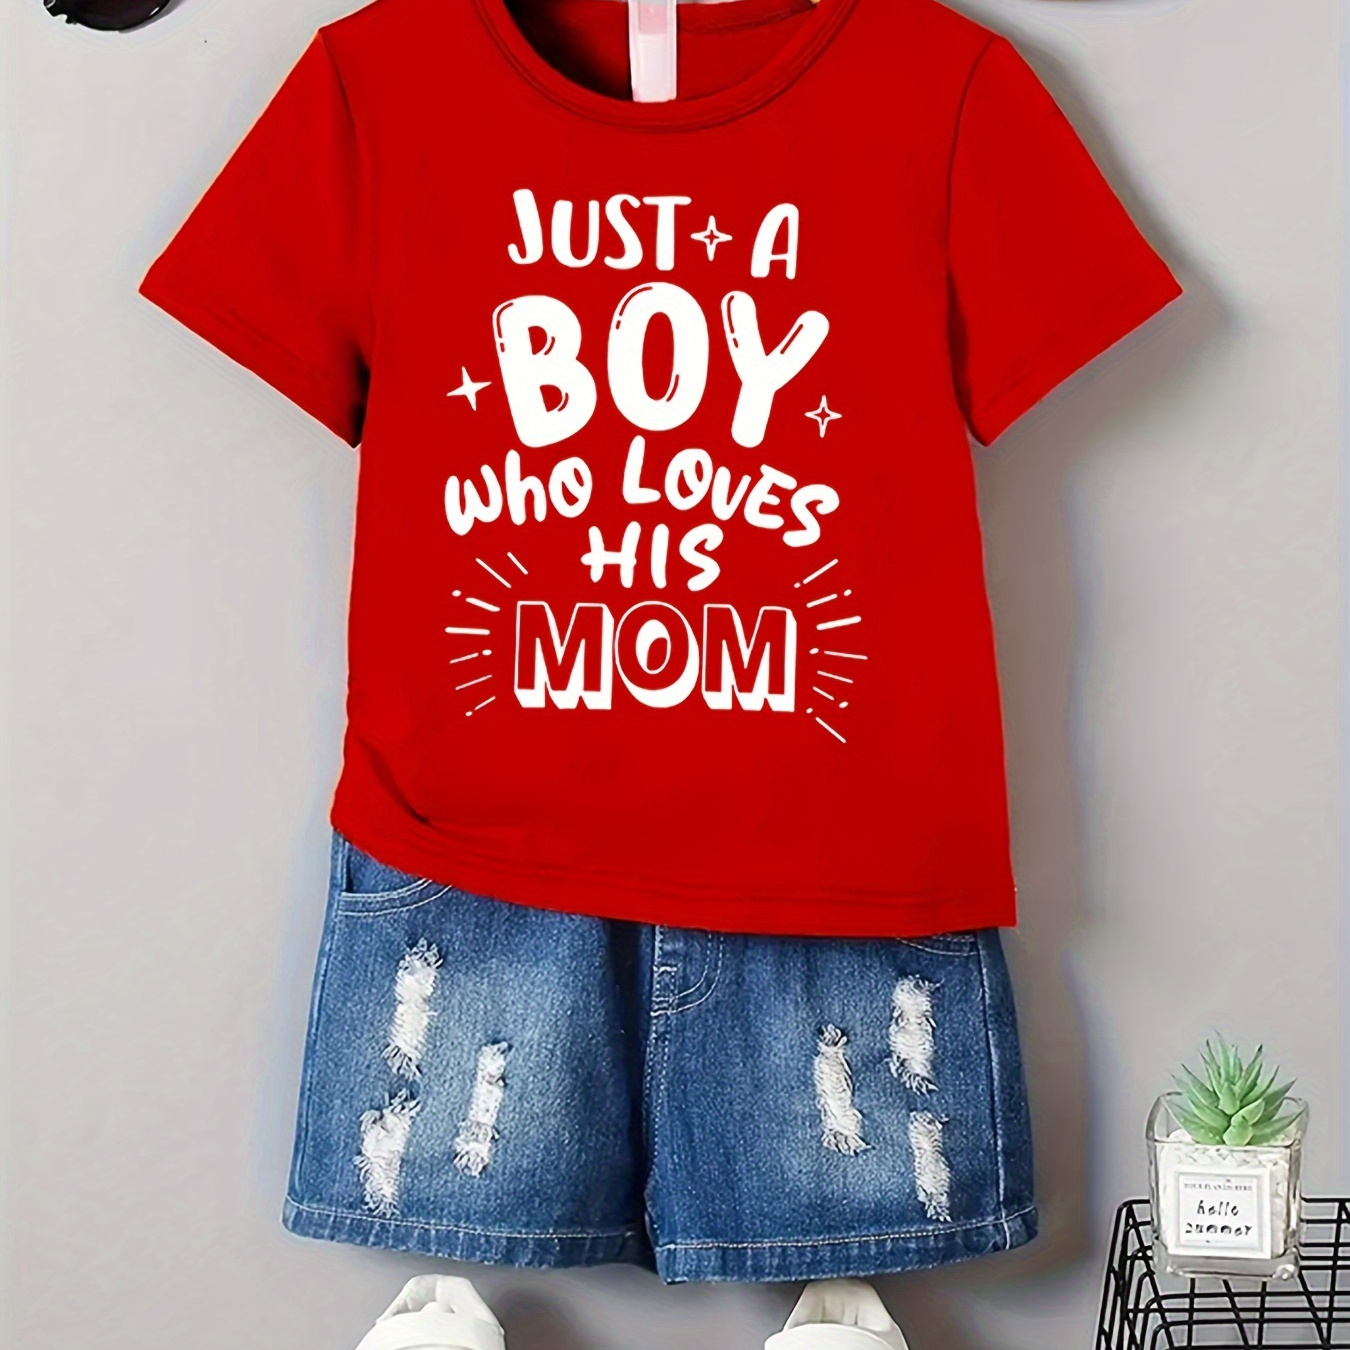 

Milkyship Summer Boys Fashion T-shirt With Just A Boy Who Loves His Mom Letter Print - Cute And Casual Short Sleeve Top